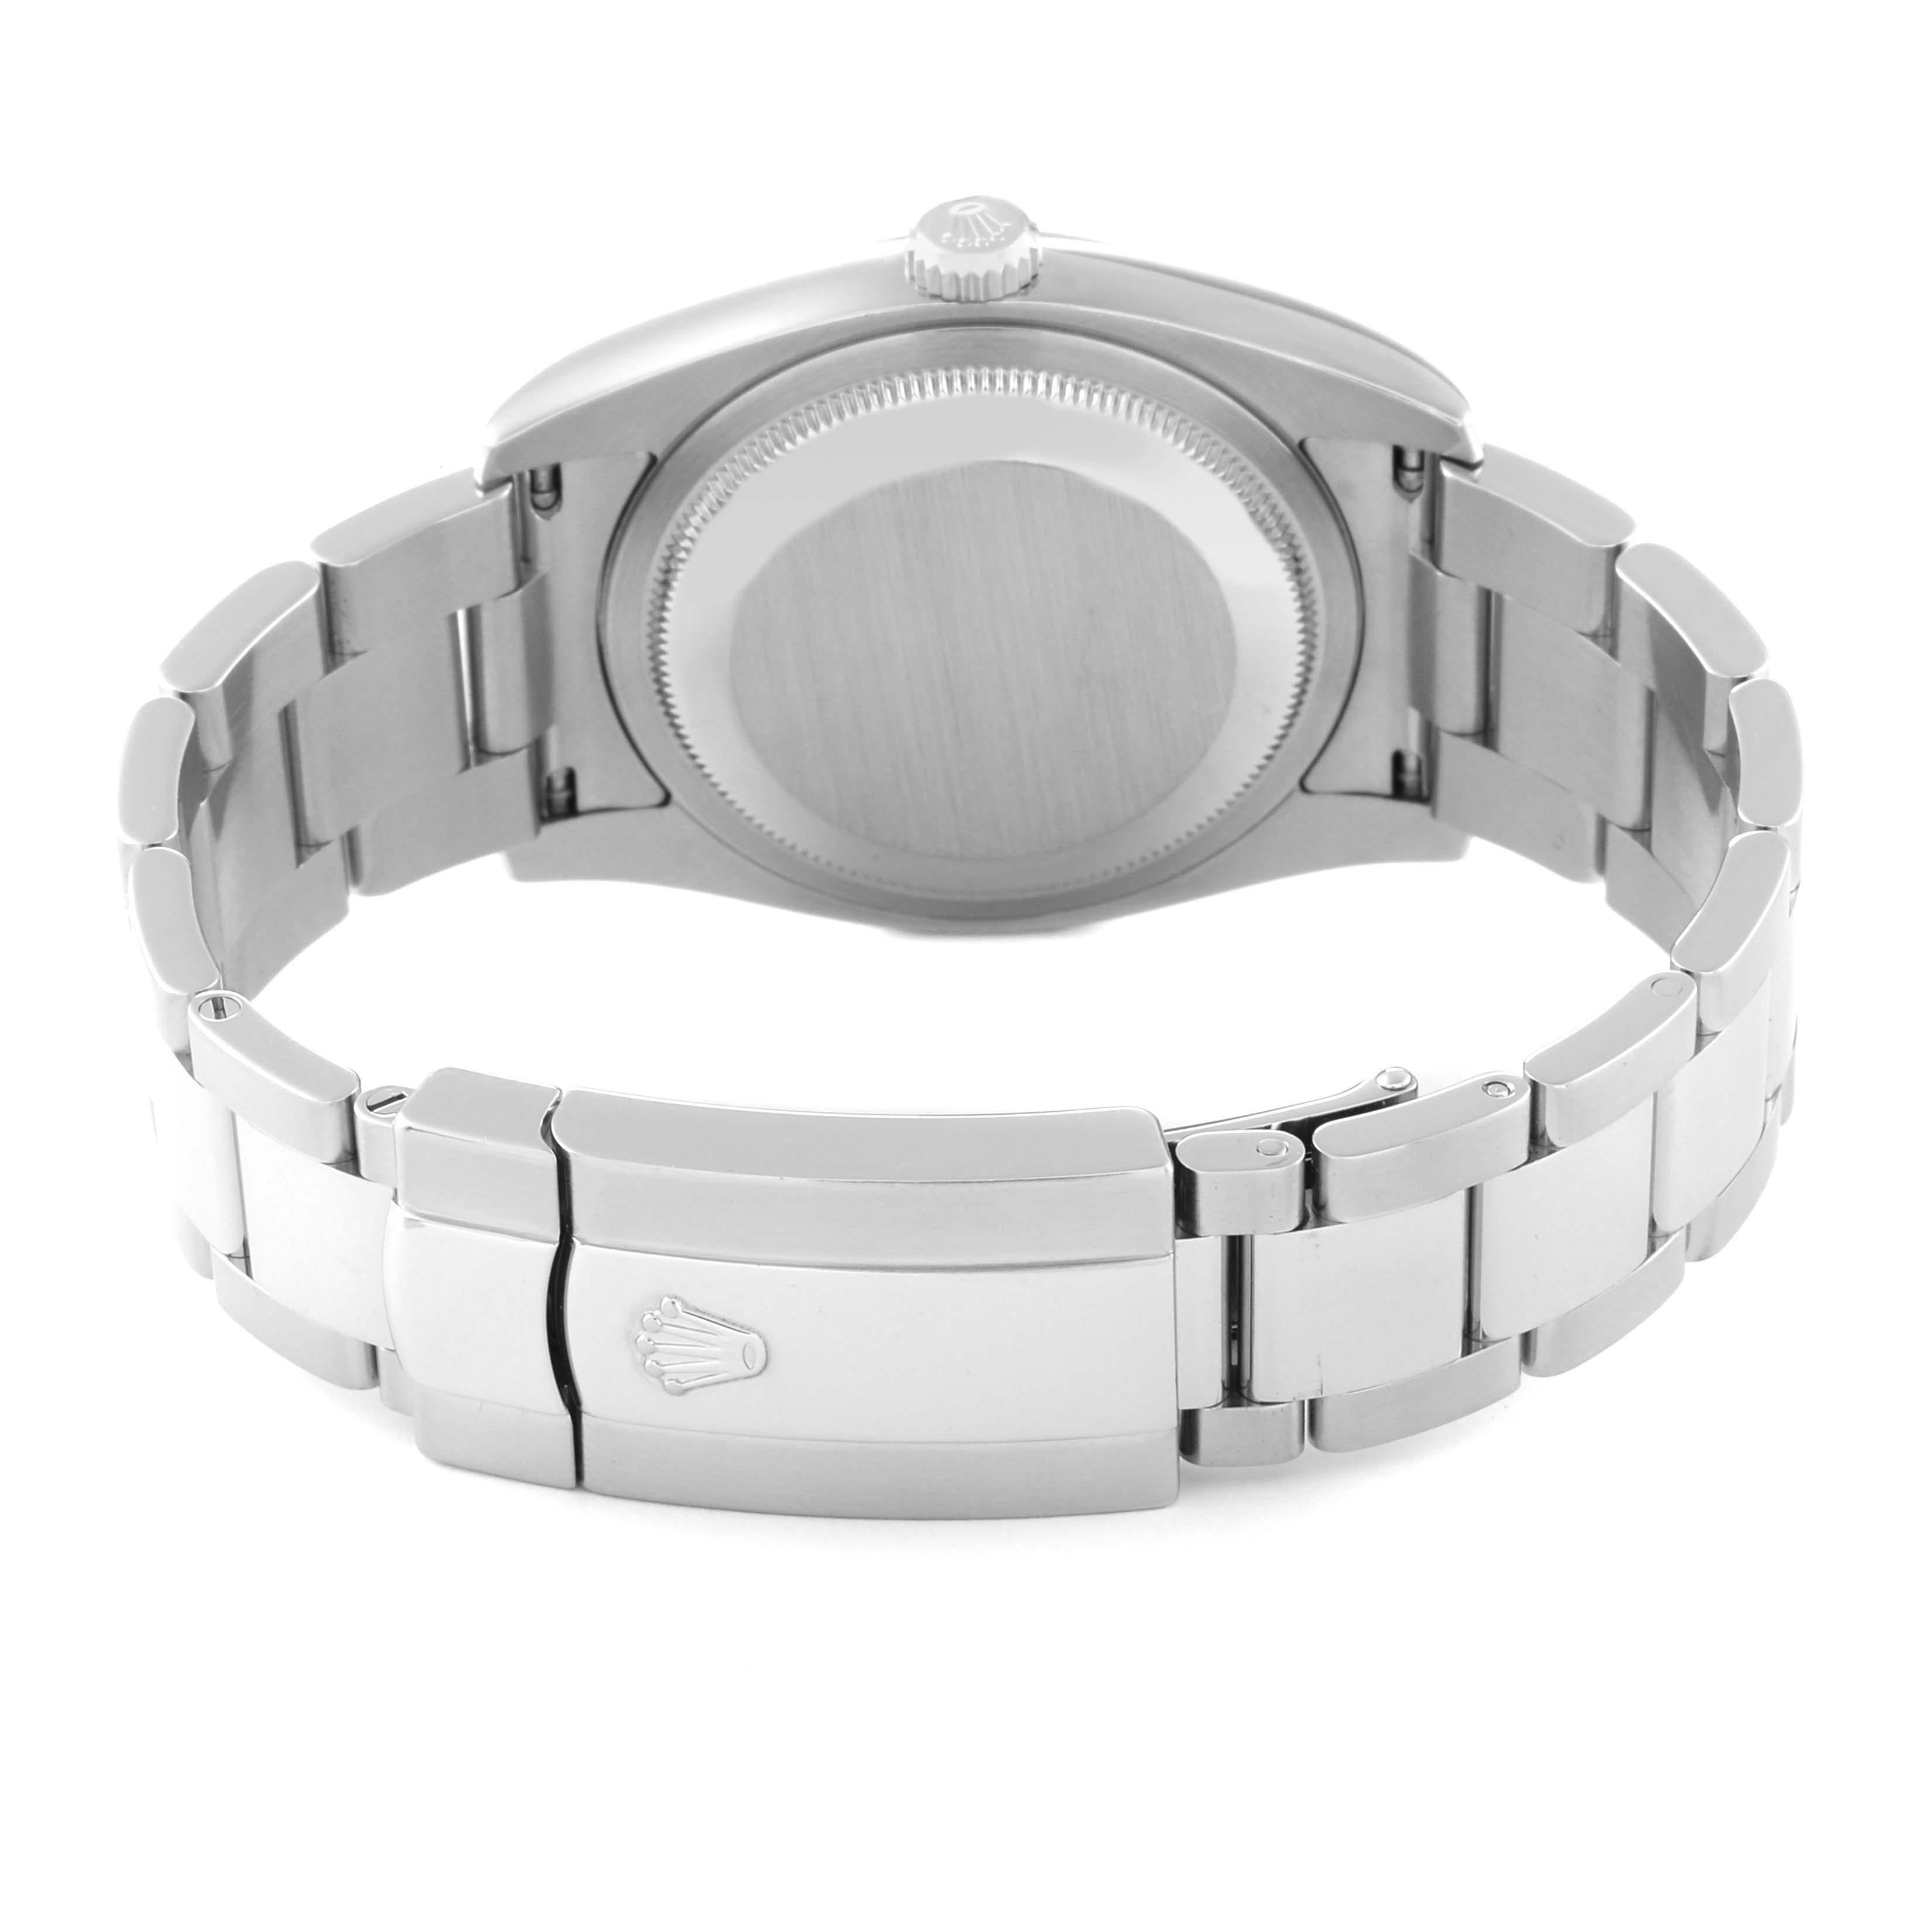 Rolex Datejust White Dial Oyster Bracelet Steel Mens Watch 116200 For Sale 7